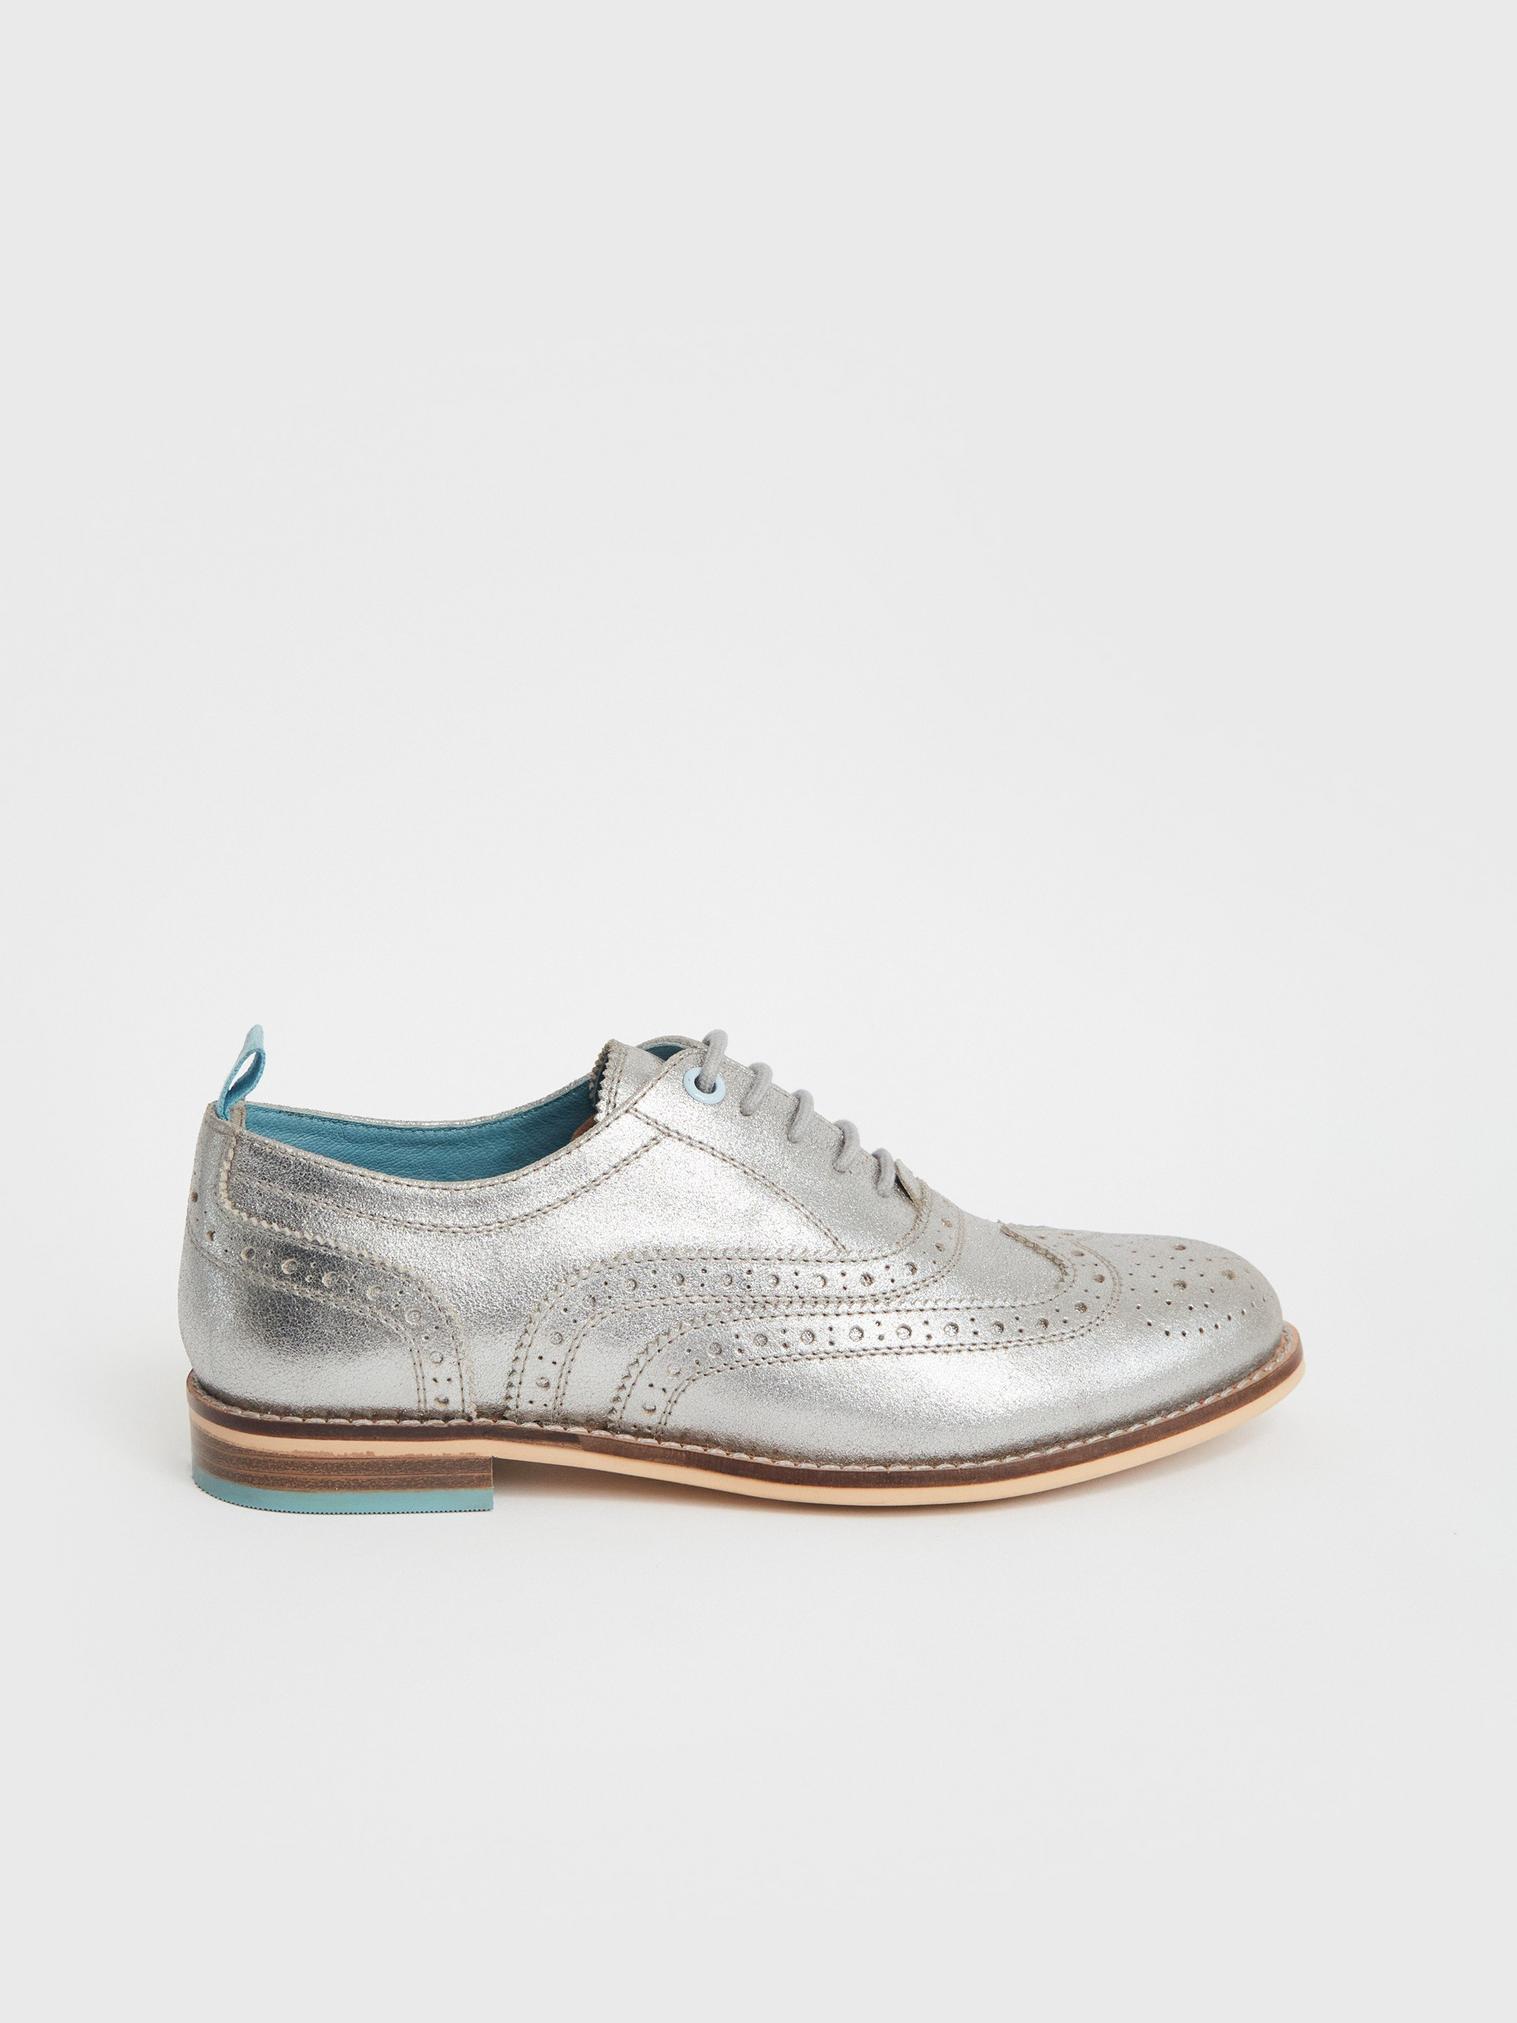 Thistle Lace Up Brogue in SLV TN MET - MODEL FRONT